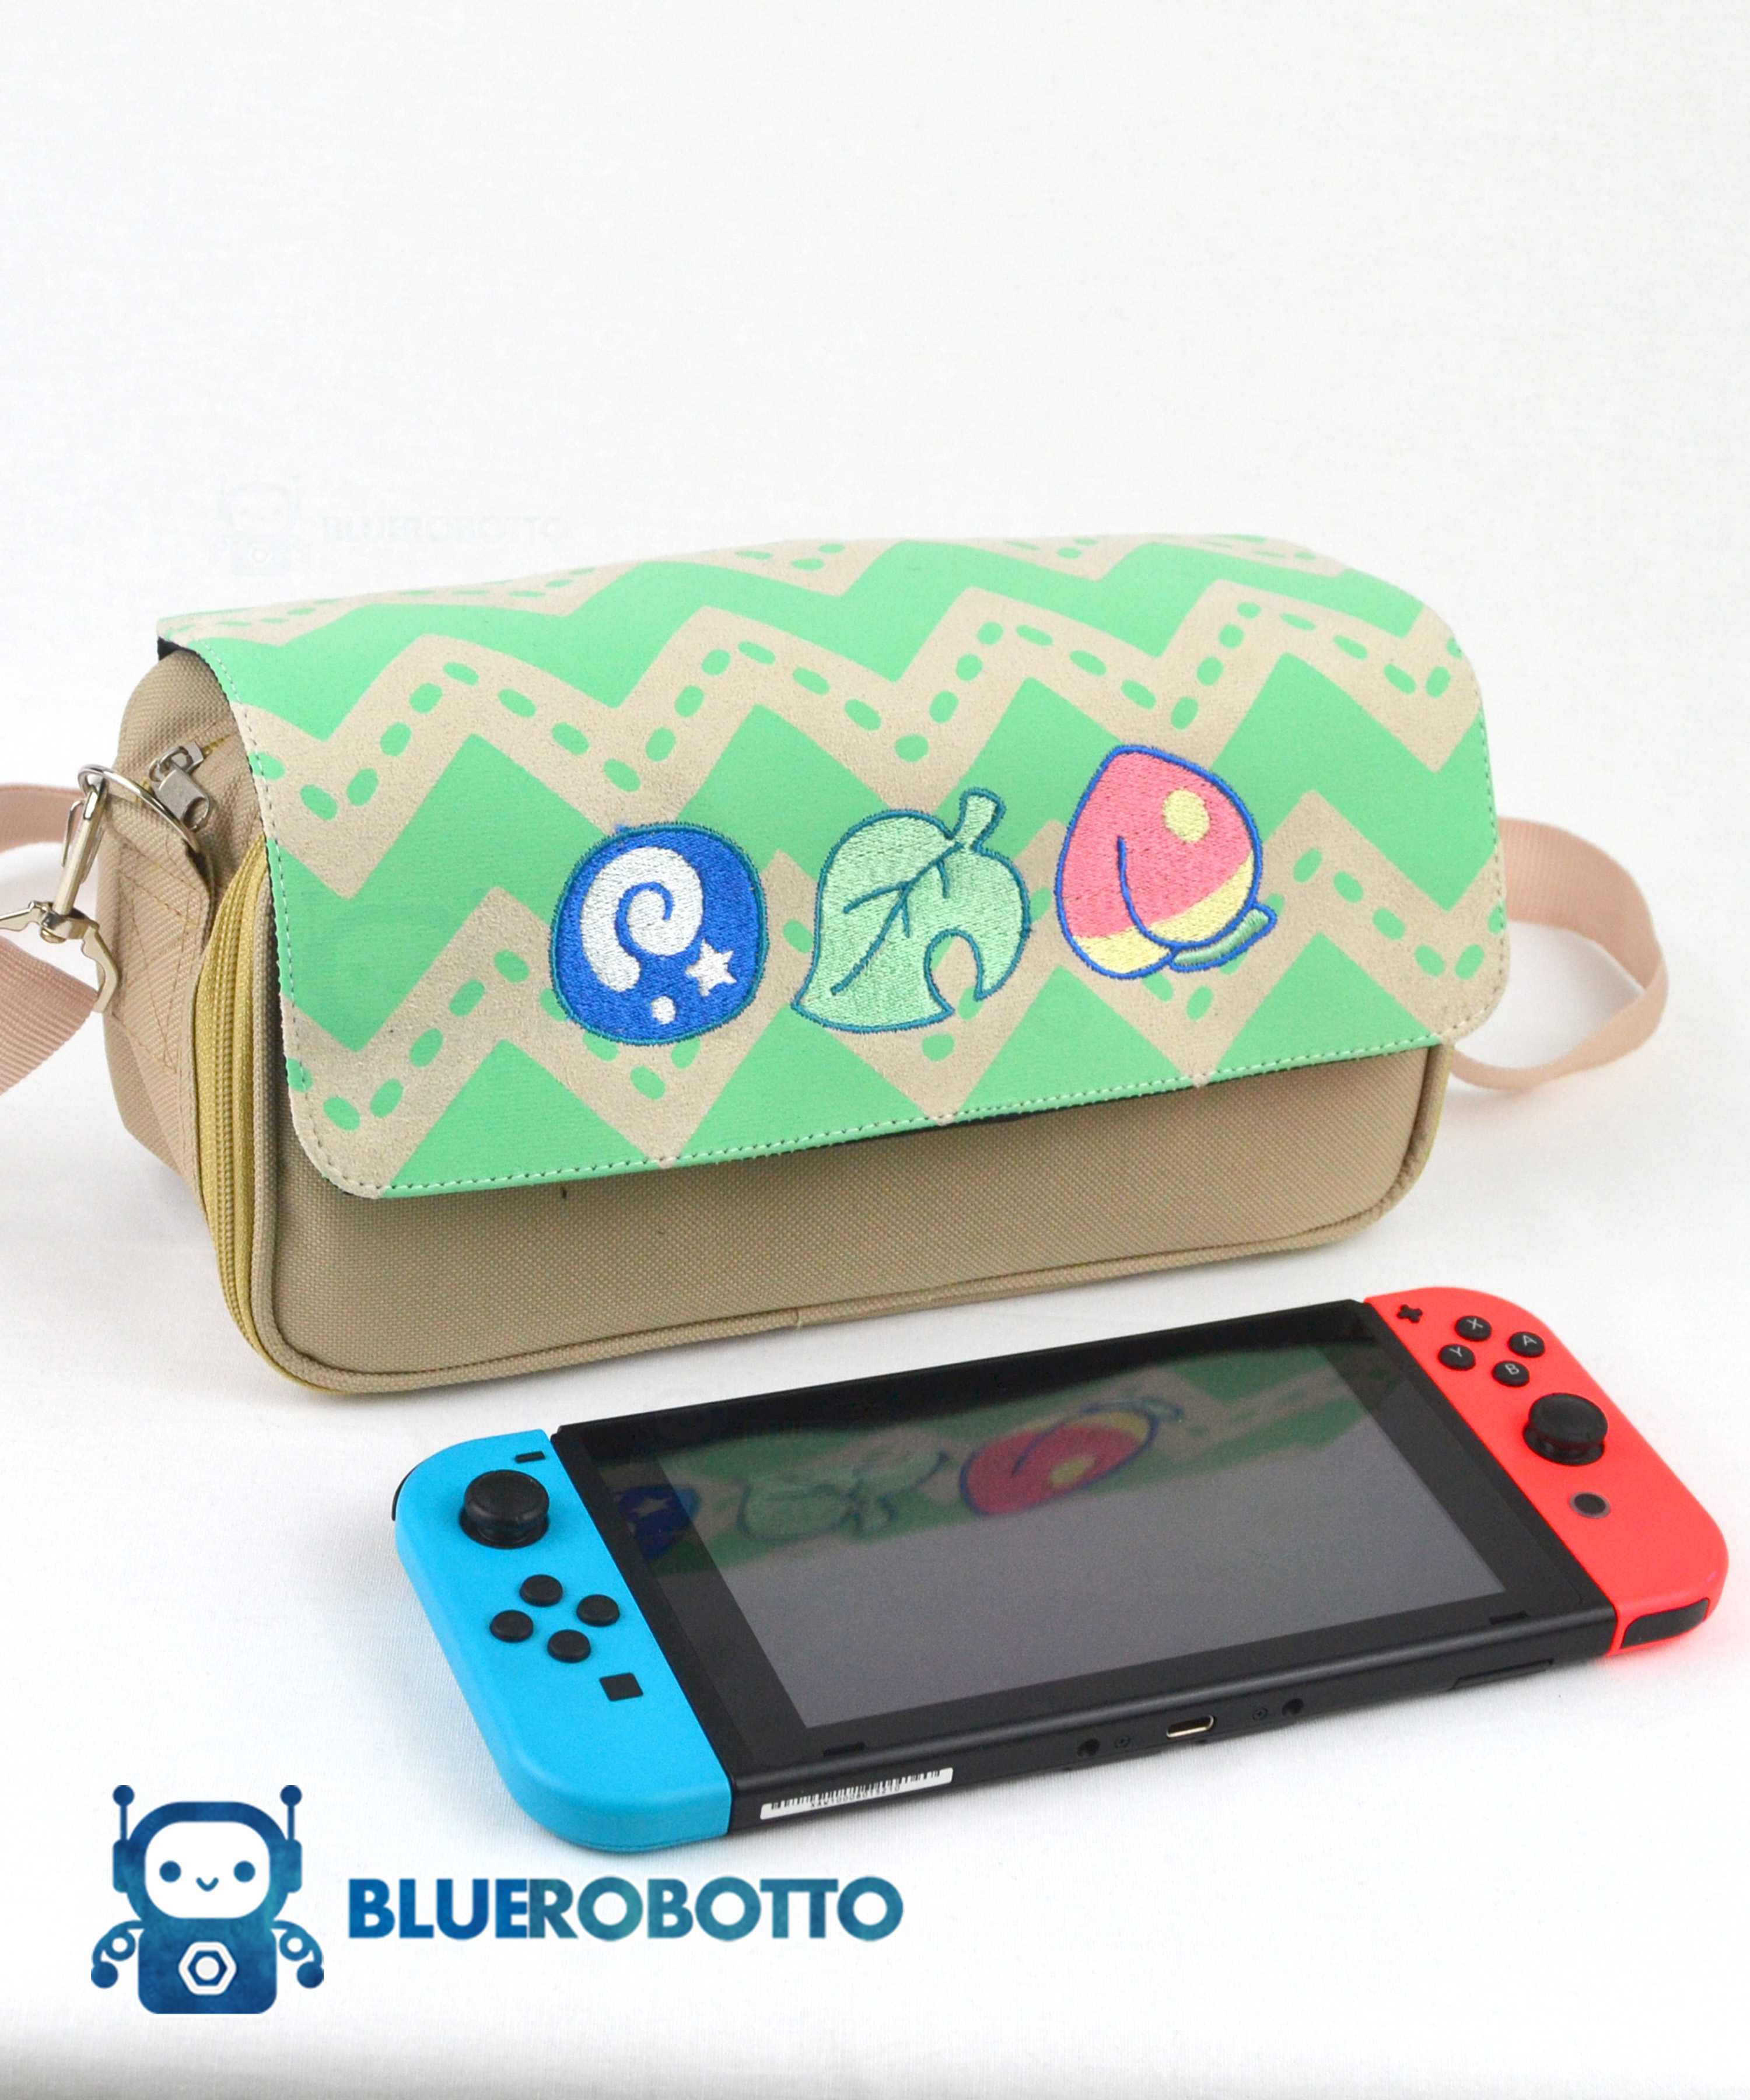 switch animal crossing accessories